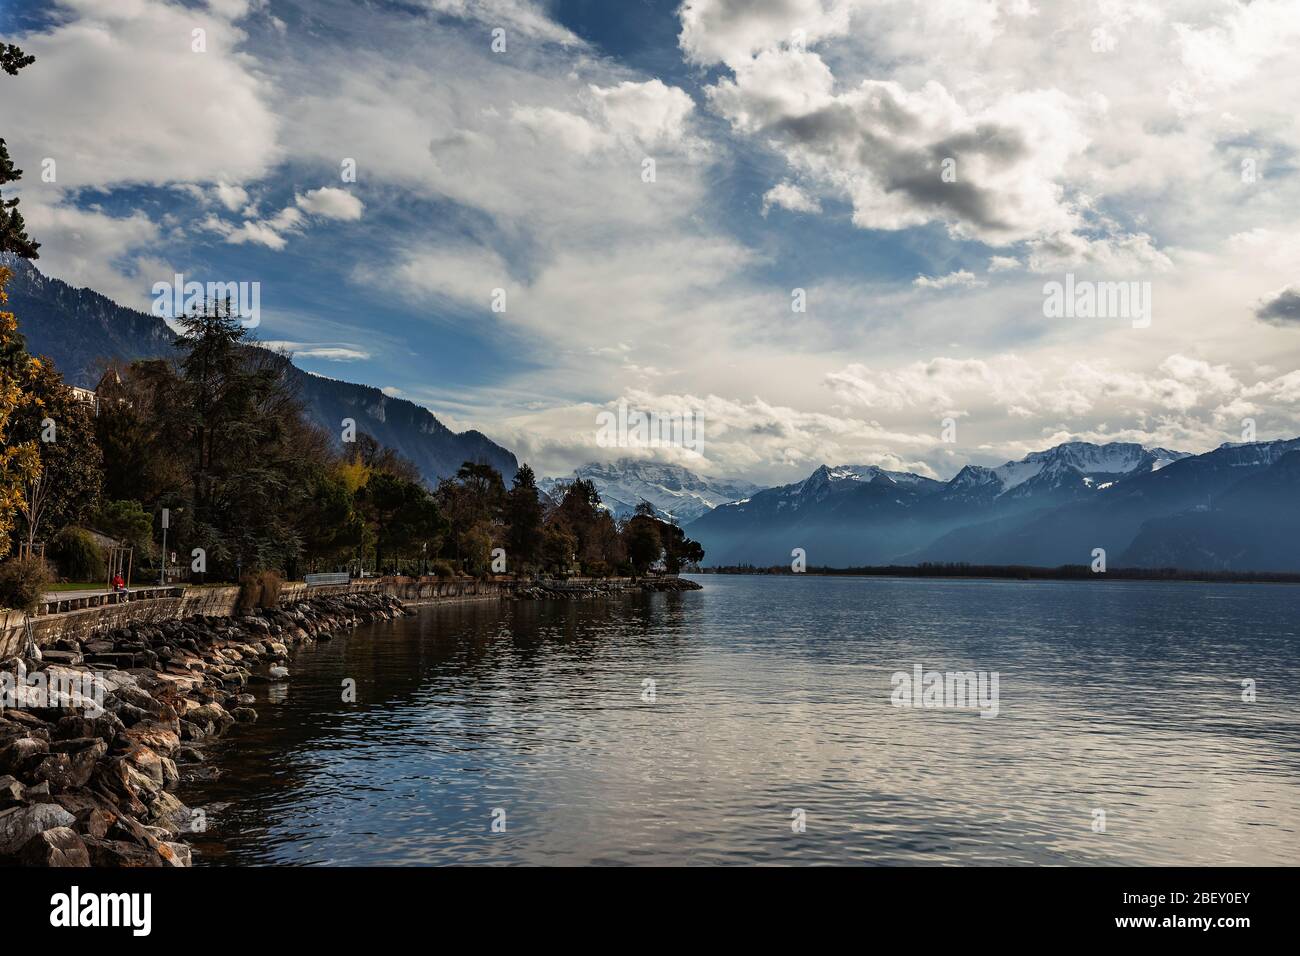 Mountreux cityscape by the lake Leman during day - Switzerland Stock Photo